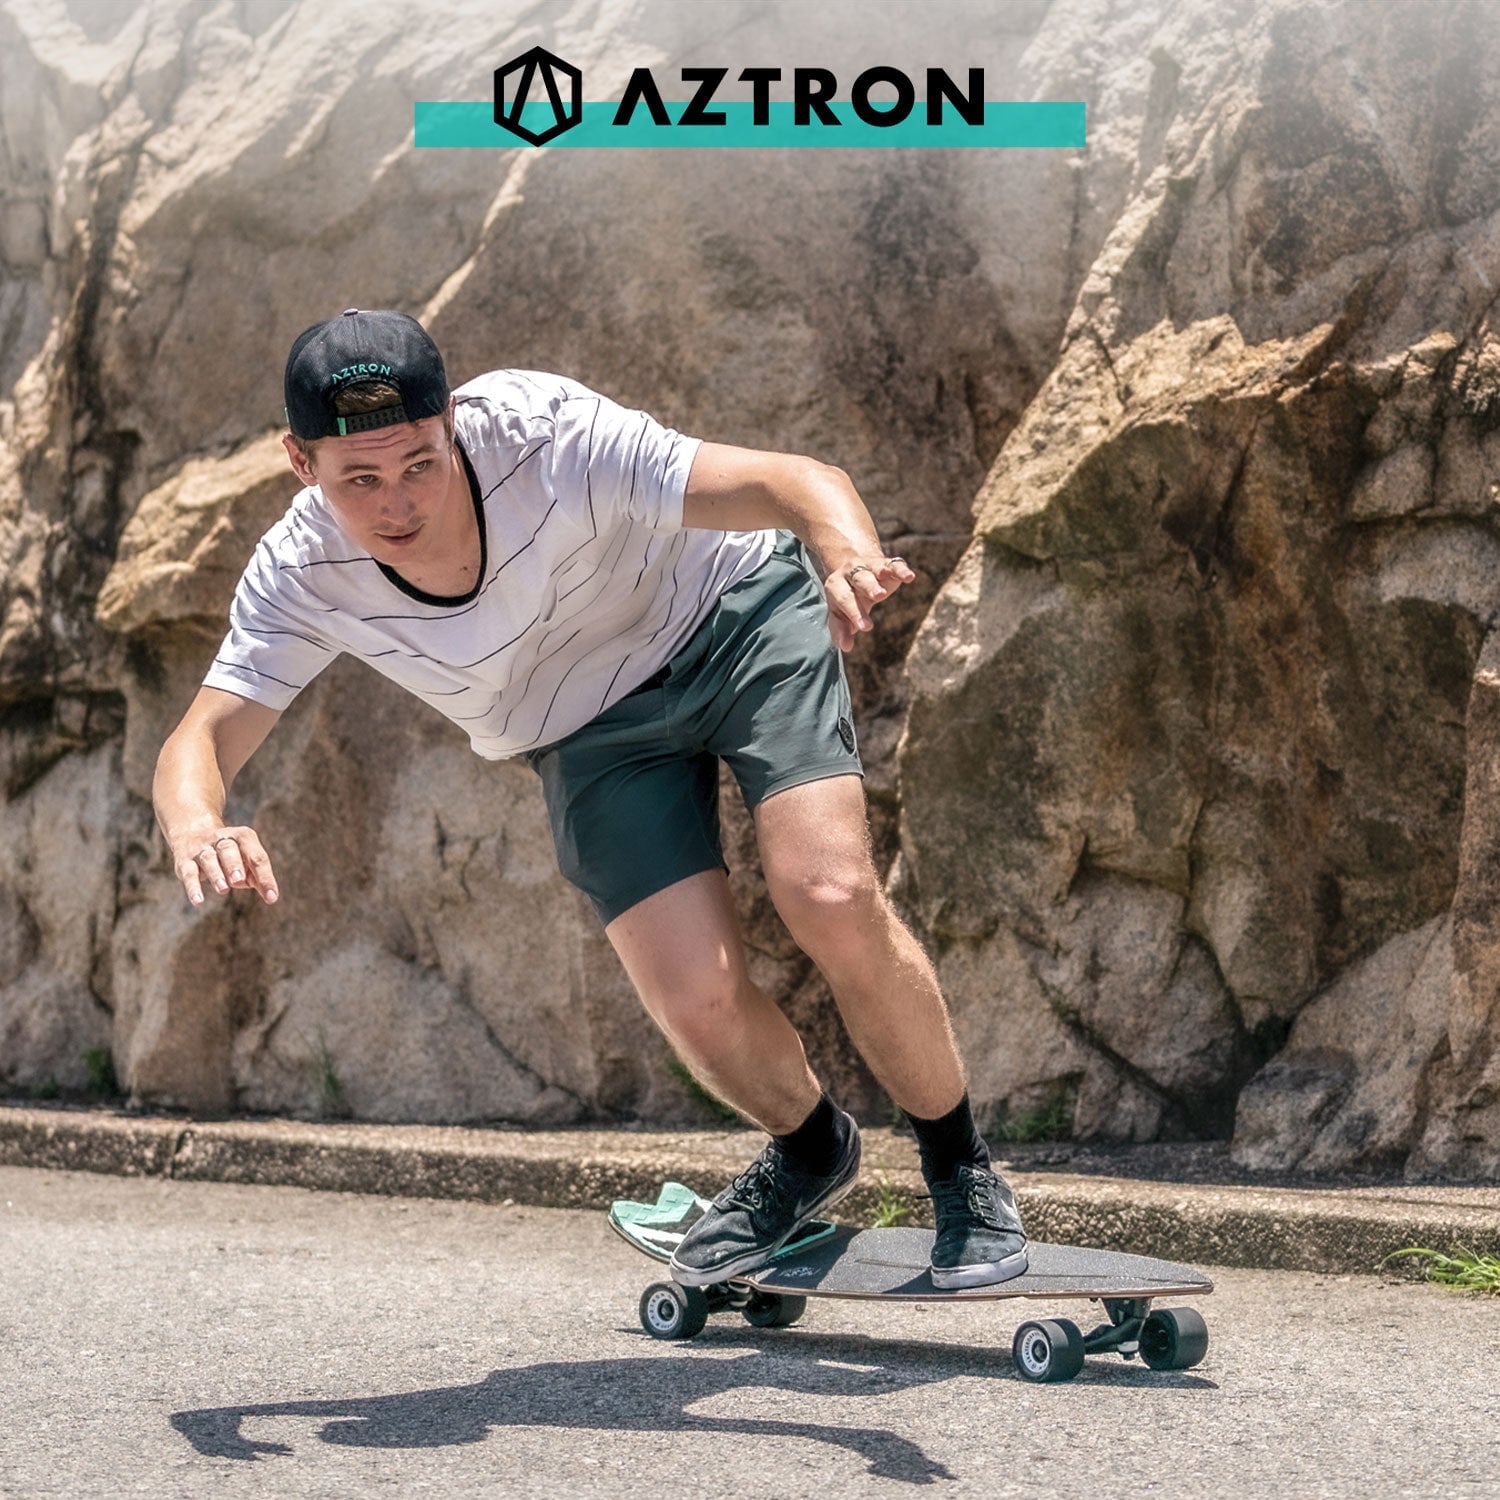 Aztron SPACE 40 Surfskate Board